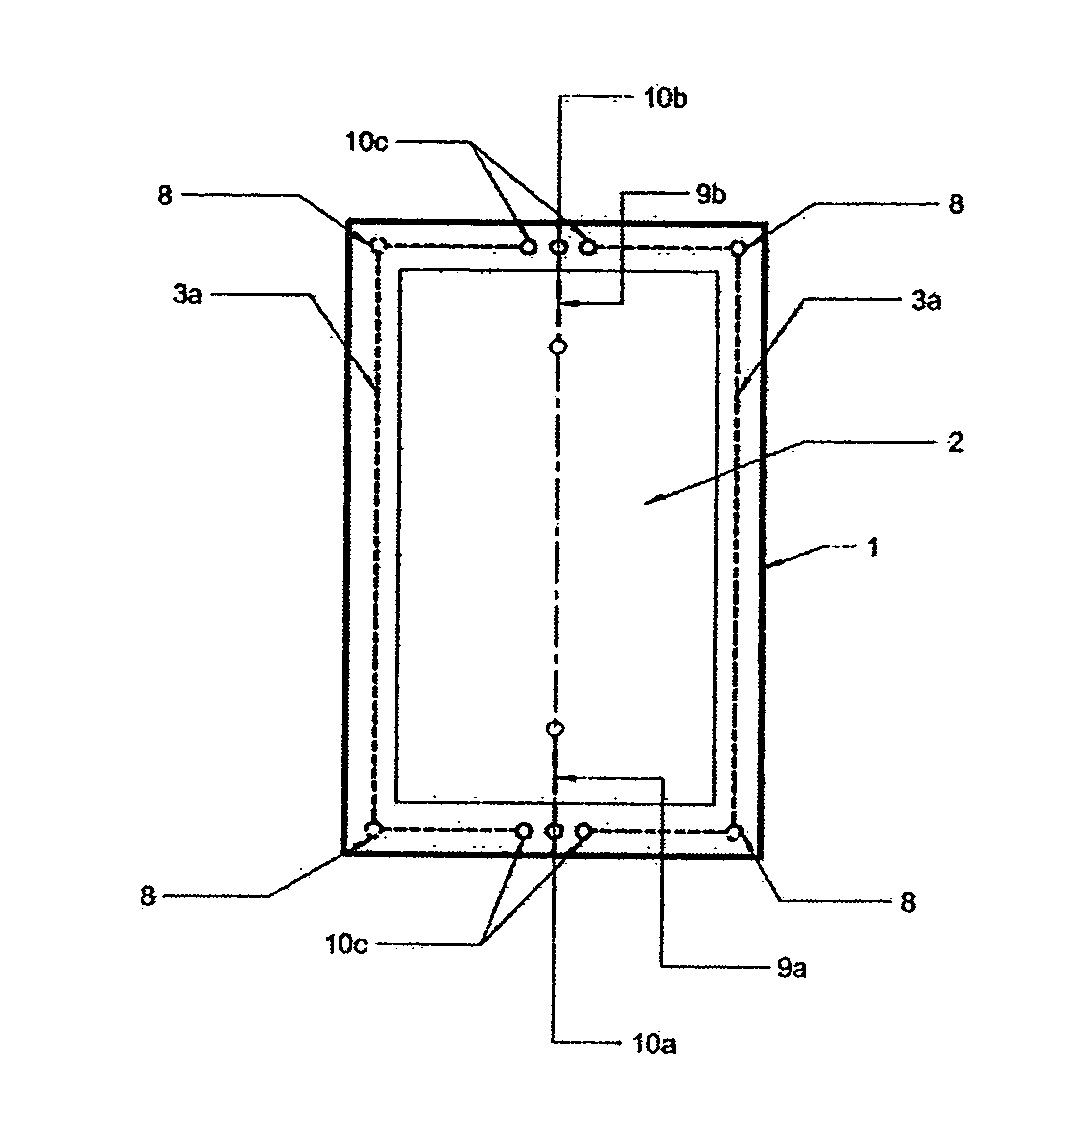 Flexible solar power module with a current lead integrated in the frame